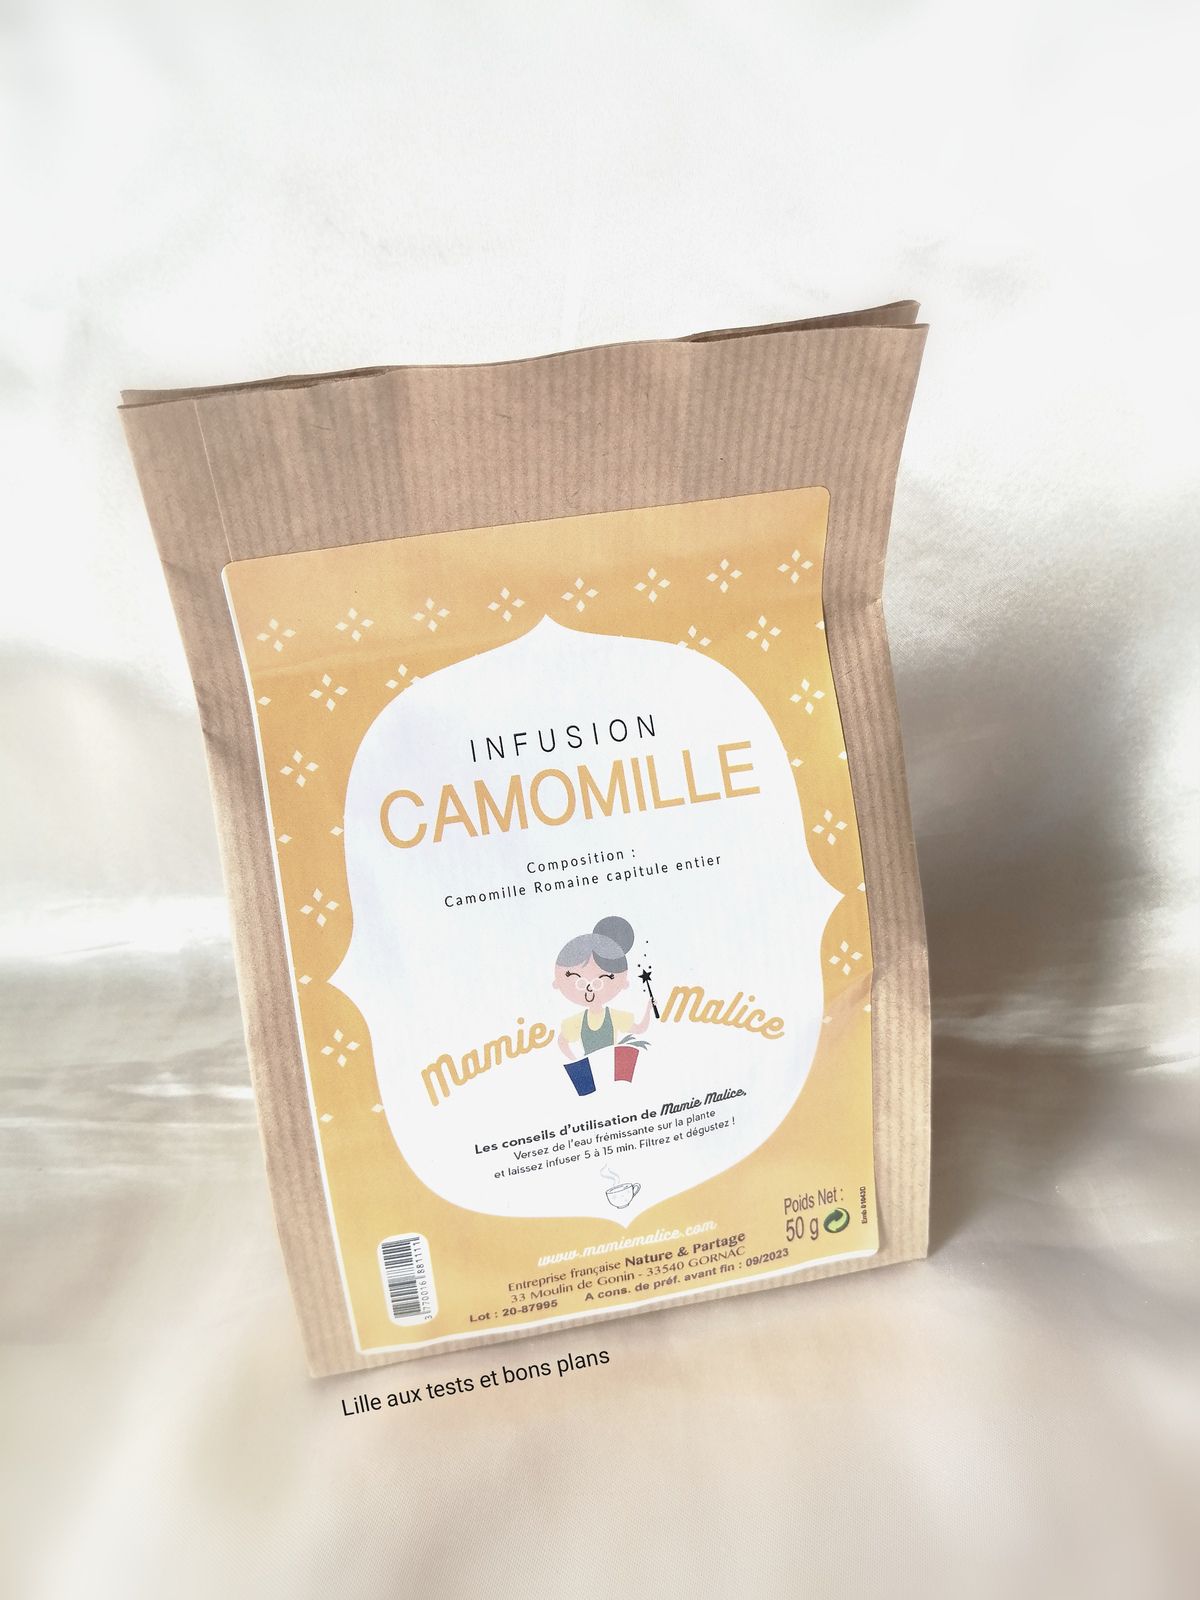 Infusion camomille - 50g - Nature et Partage